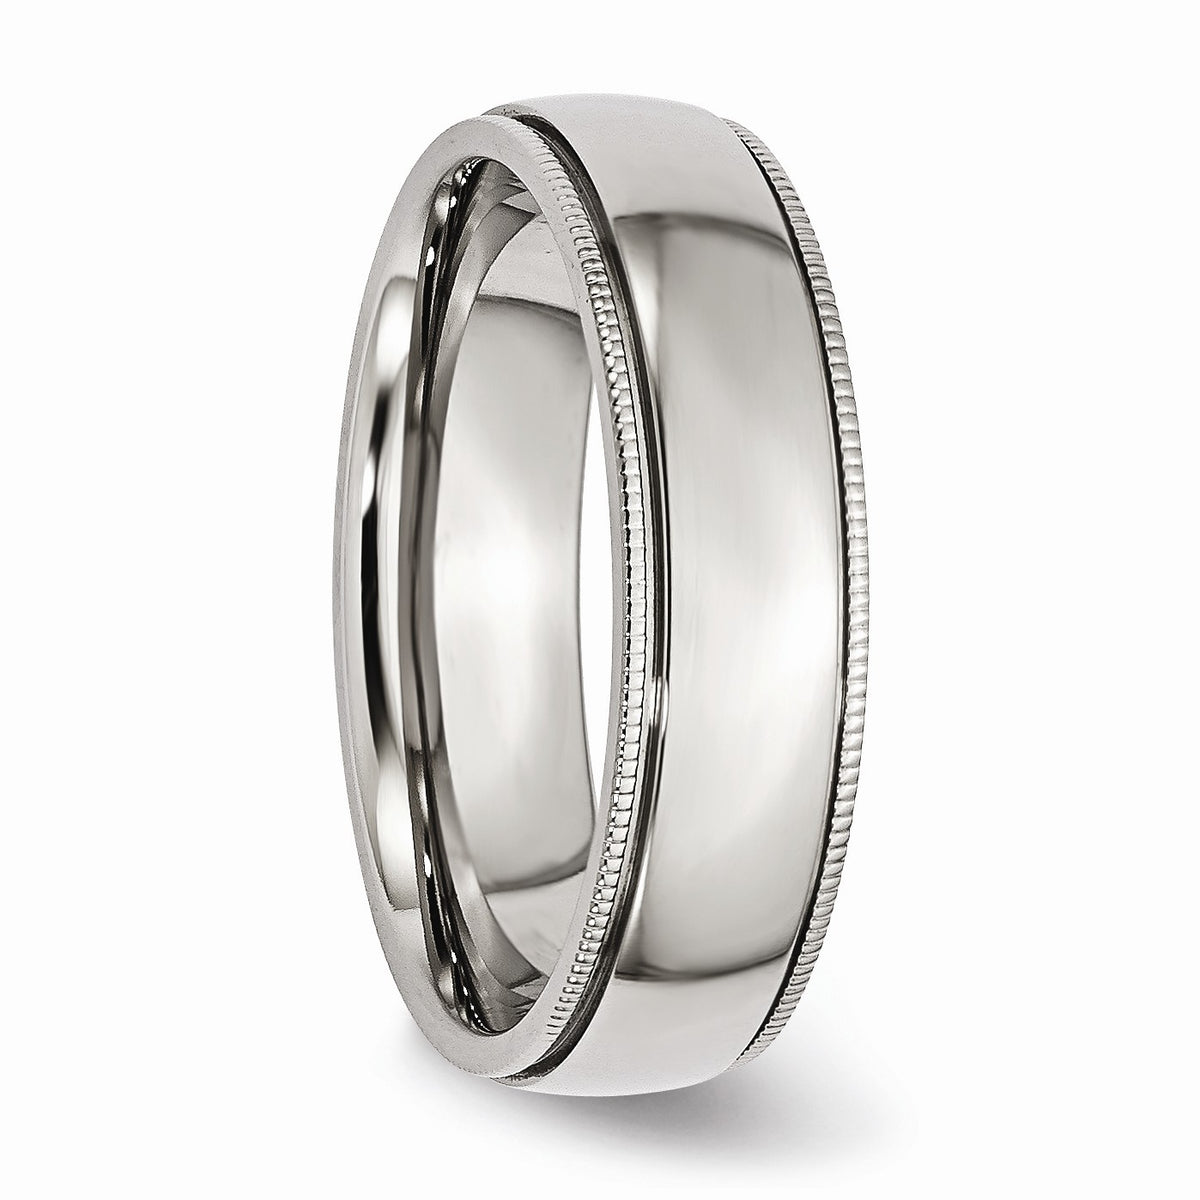 Alternate view of the Stainless Steel Beaded Edge 6mm Polished Comfort Fit Band by The Black Bow Jewelry Co.